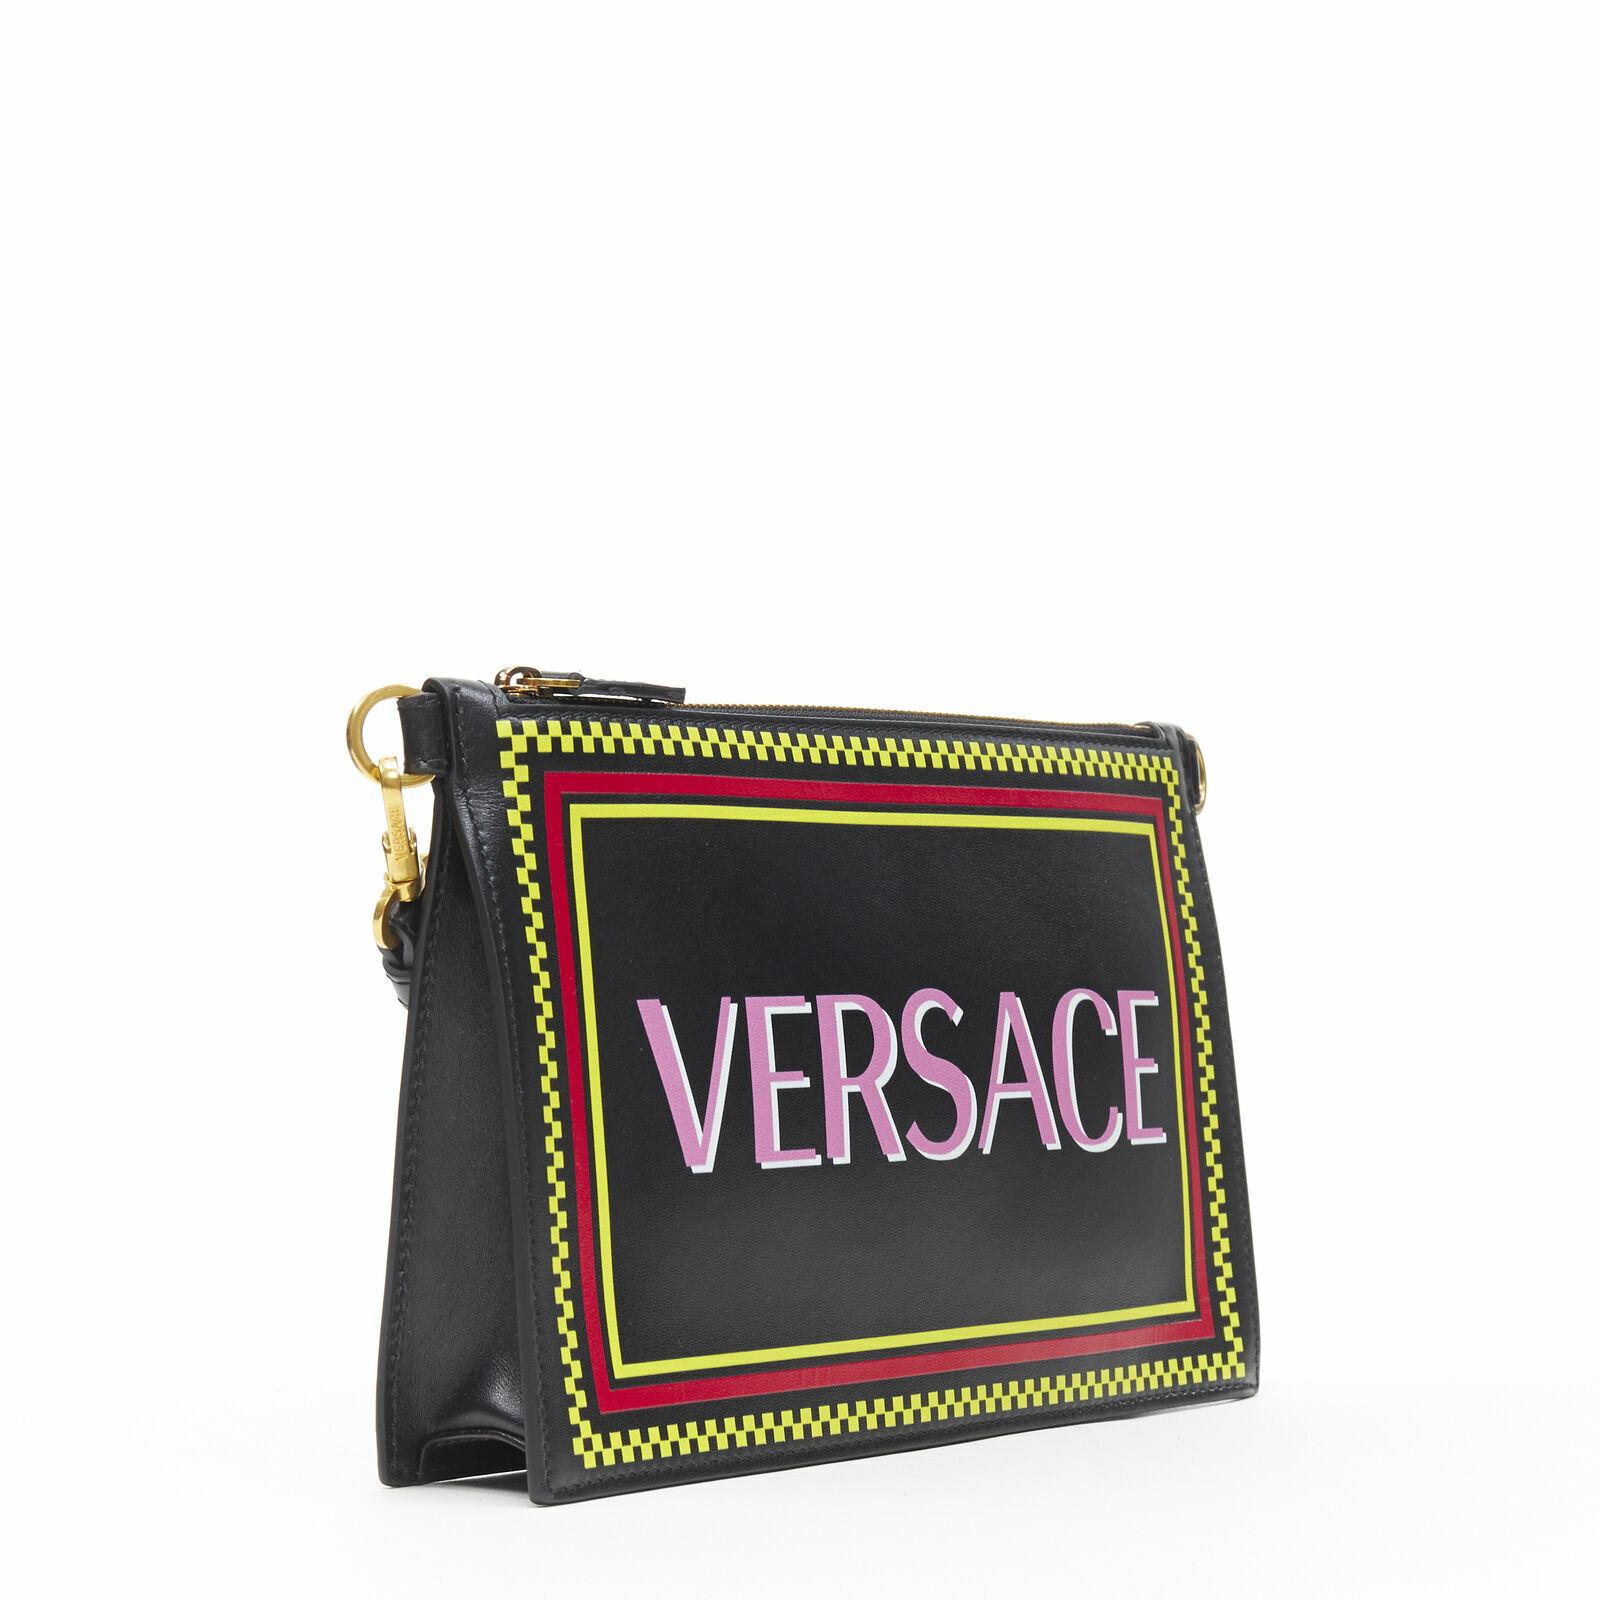 VERSACE 90s graphic logo black calf zip pouch crossbody clutch bag
Reference: TGAS/B00093
Brand: Versace
Designer: Donatella Versace
Collection: 2020
Material: Leather
Color: Black
Pattern: Solid
Closure: Zip
Extra Details: 90's logo print at front